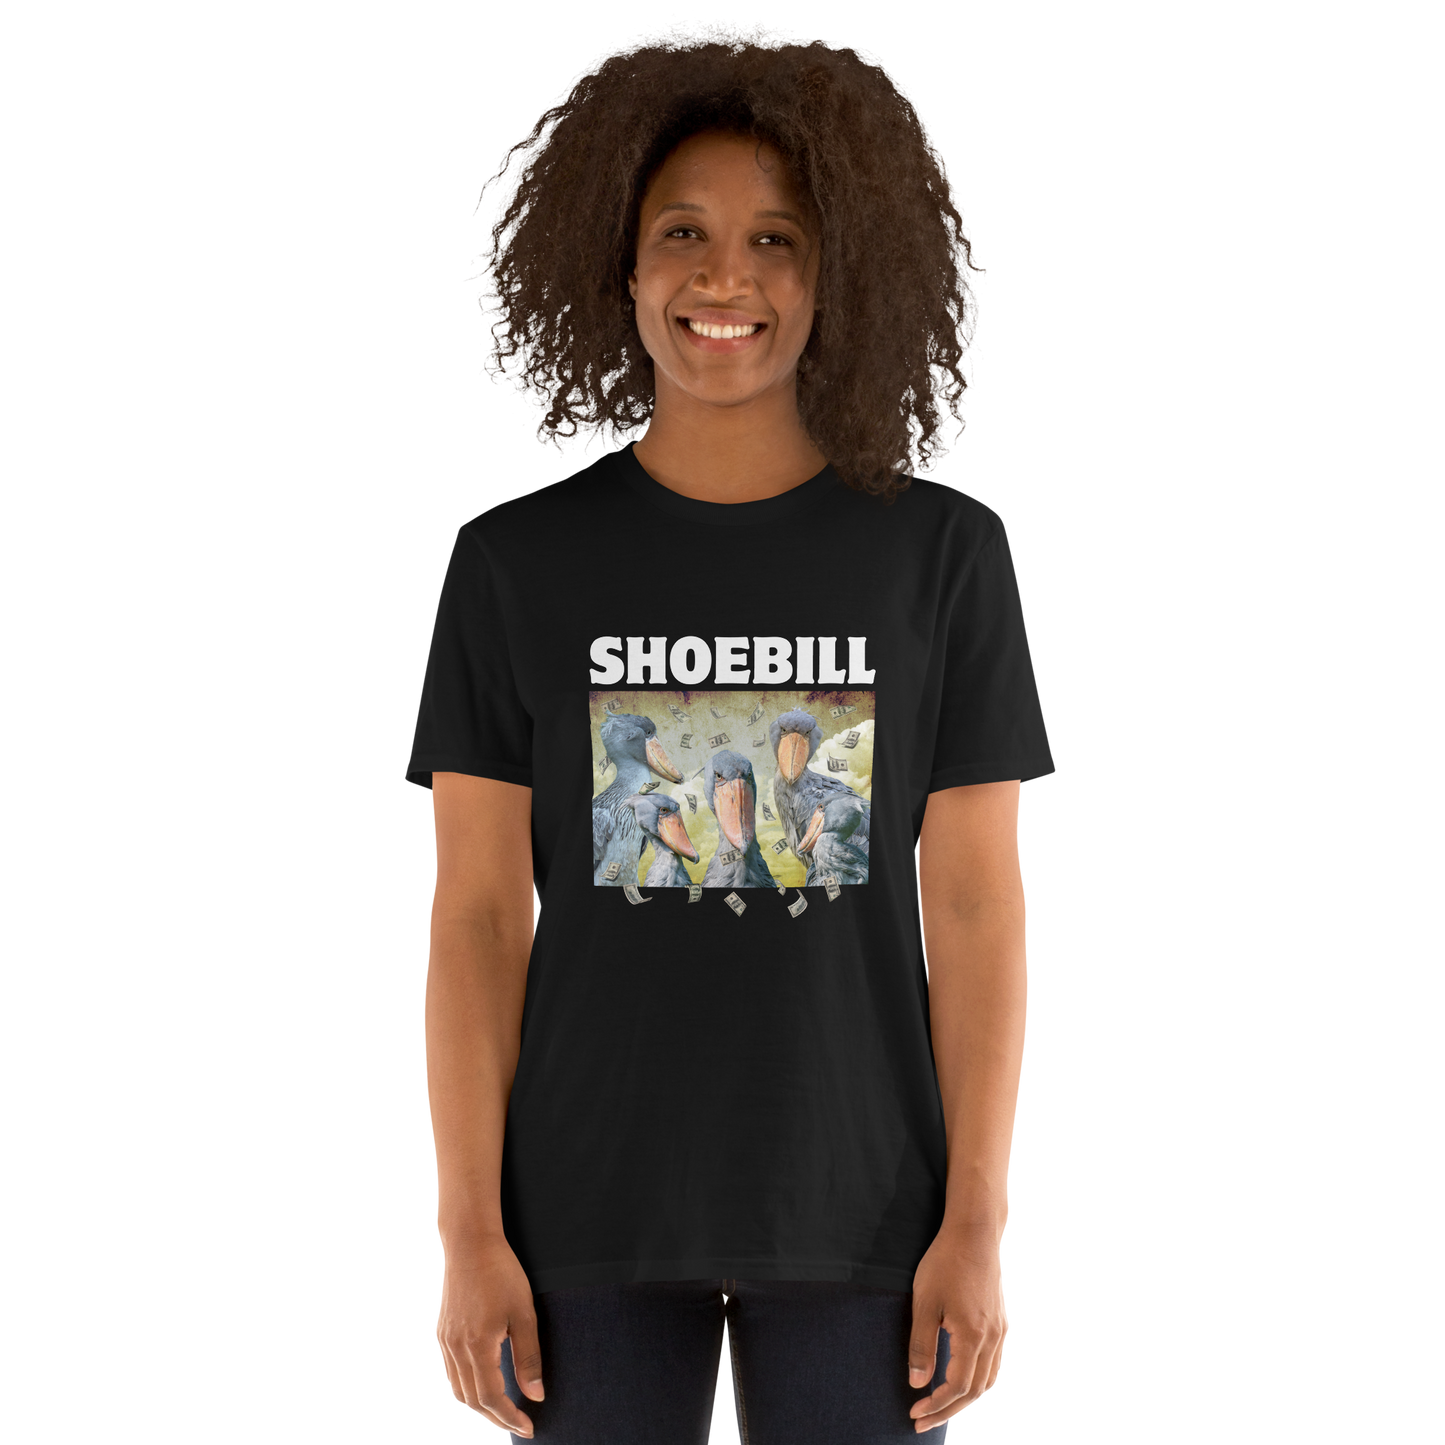 Woman wearing a Black Shoebill T-Shirt featuring a cool Shoebill graphic on the chest - Artsy/Funny Graphic Shoebill Stork T-Shirts - Boozy Fox